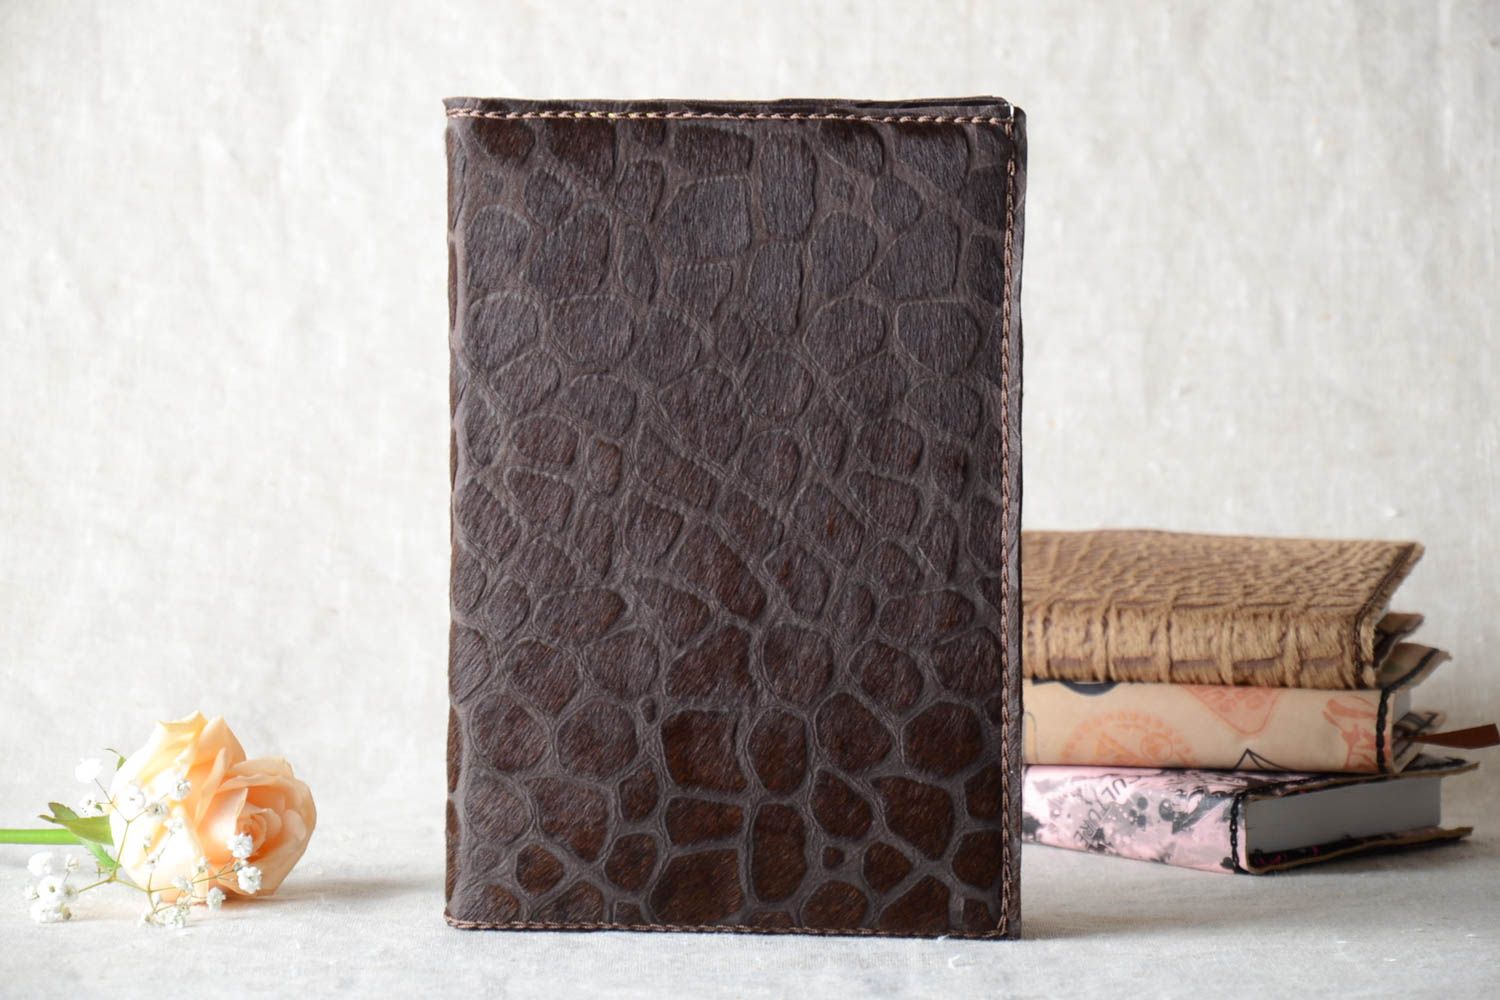 Handmade leather goods leather notebook cover leather book covers cool gifts photo 1